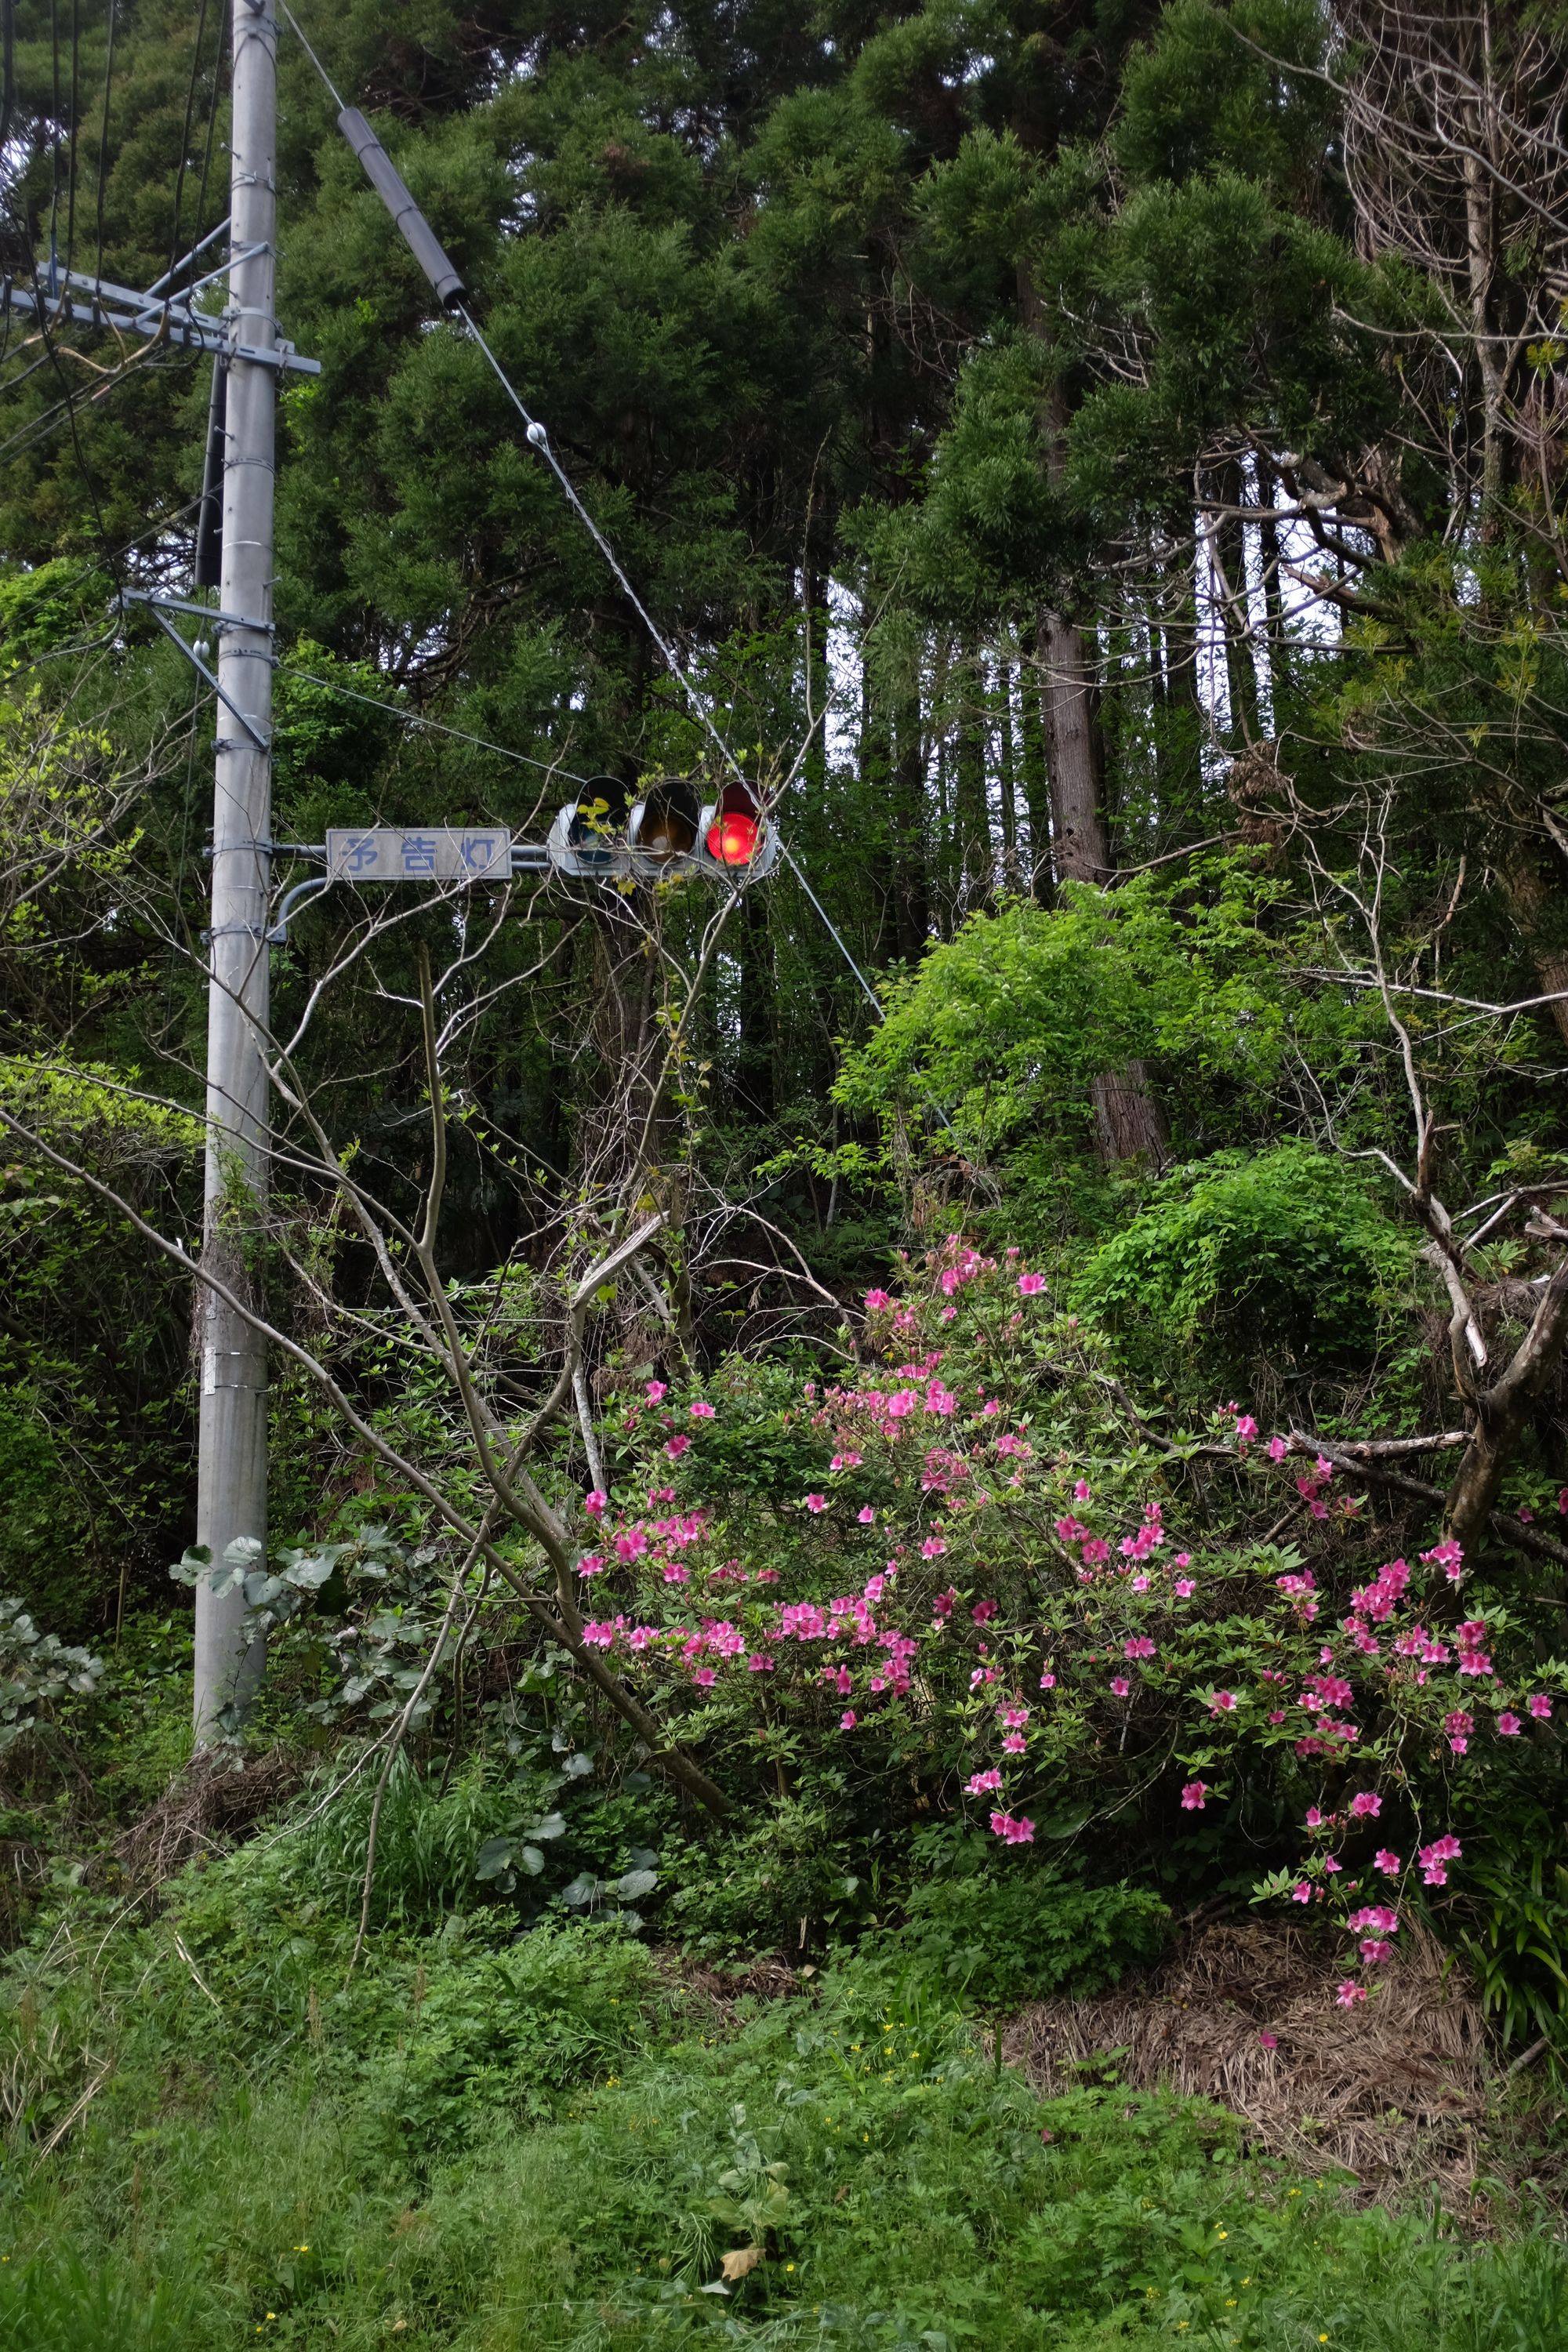 An overgrown traffic light at the edge of a forest shows red.